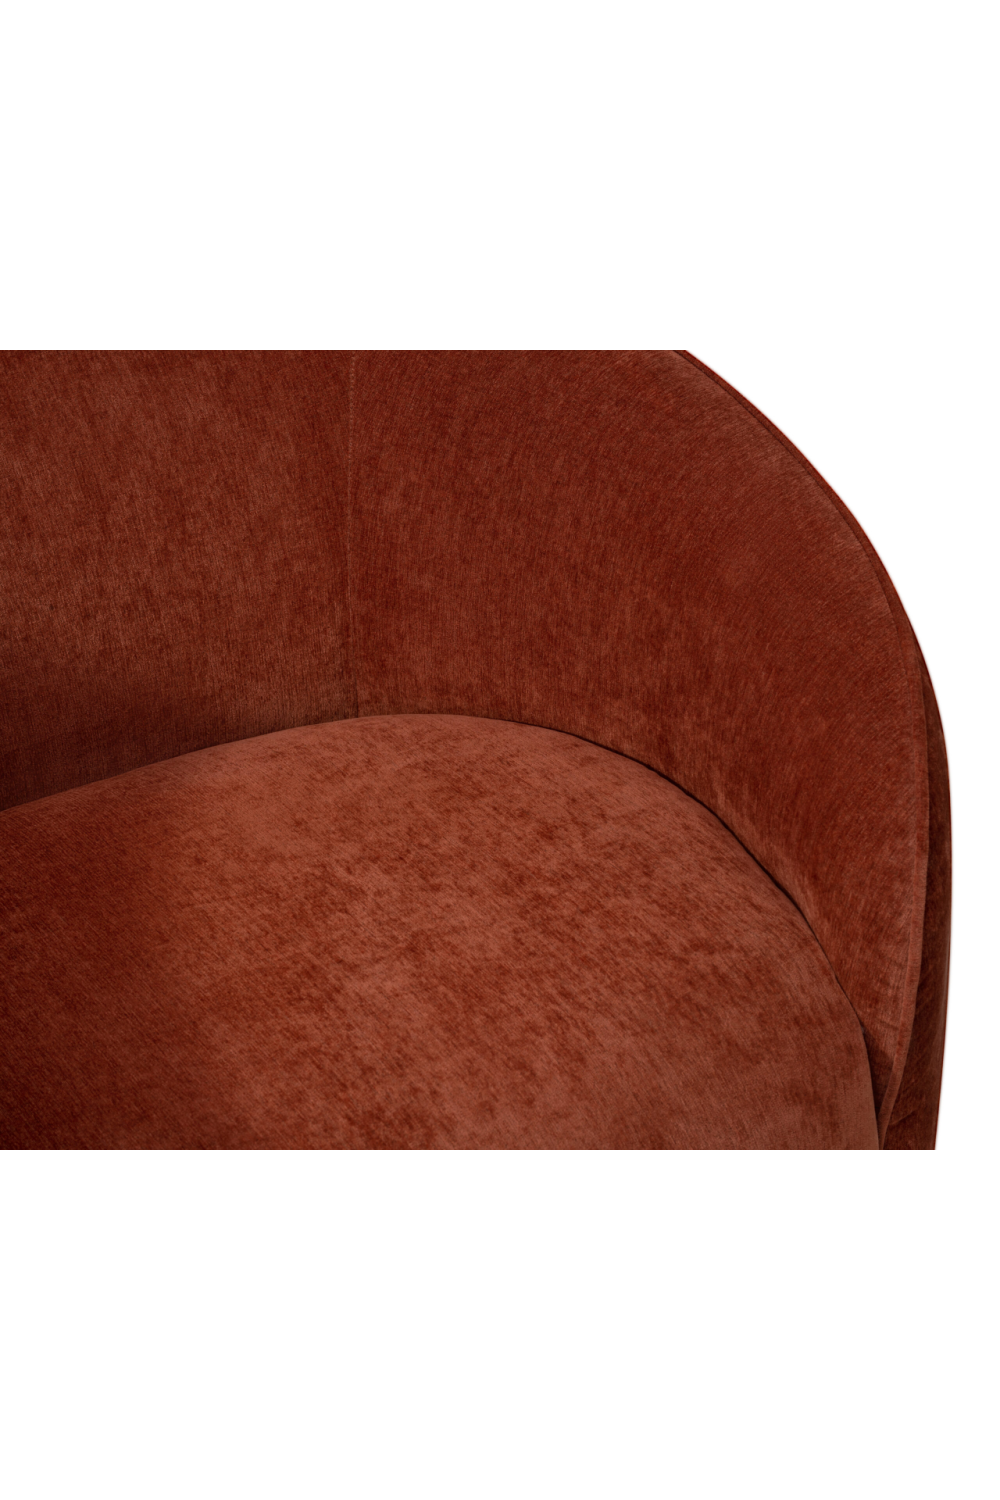 Rounded Modern Occasional Chair | Liang & Eimil Polta | Oroa.com